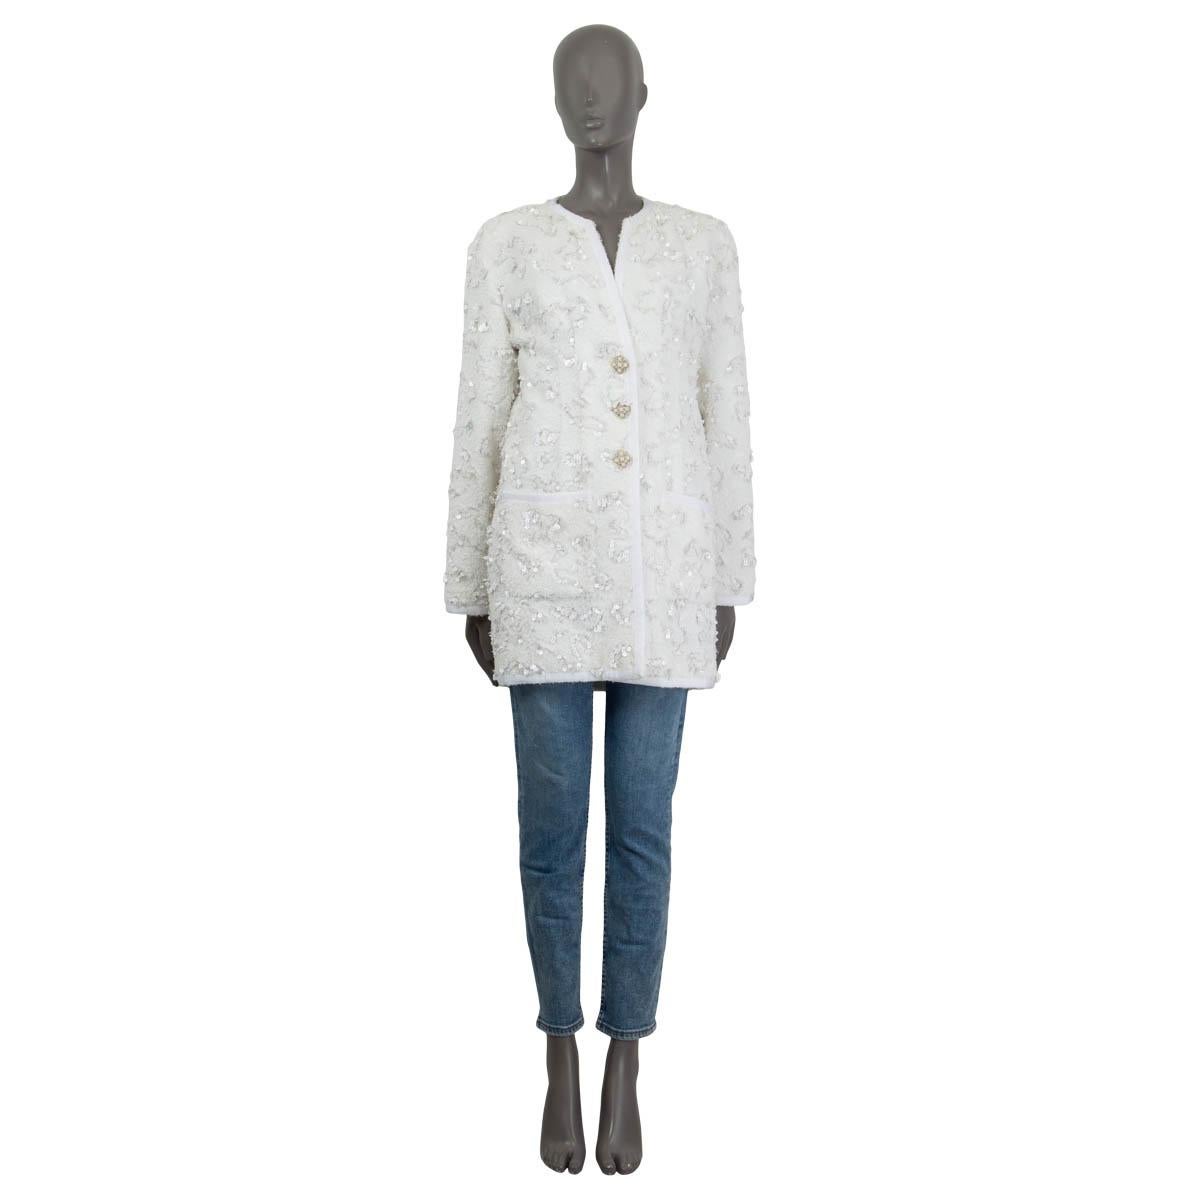 100% authentic Chanel 2019 Oversized Sequin Embellished Terry Cloth Jacket in off-white cotton (80%) and poyester (20%) featuring grosgrain trimming and two patch pockets at front. Jacket has three crystal and stone embellished buttons at front.